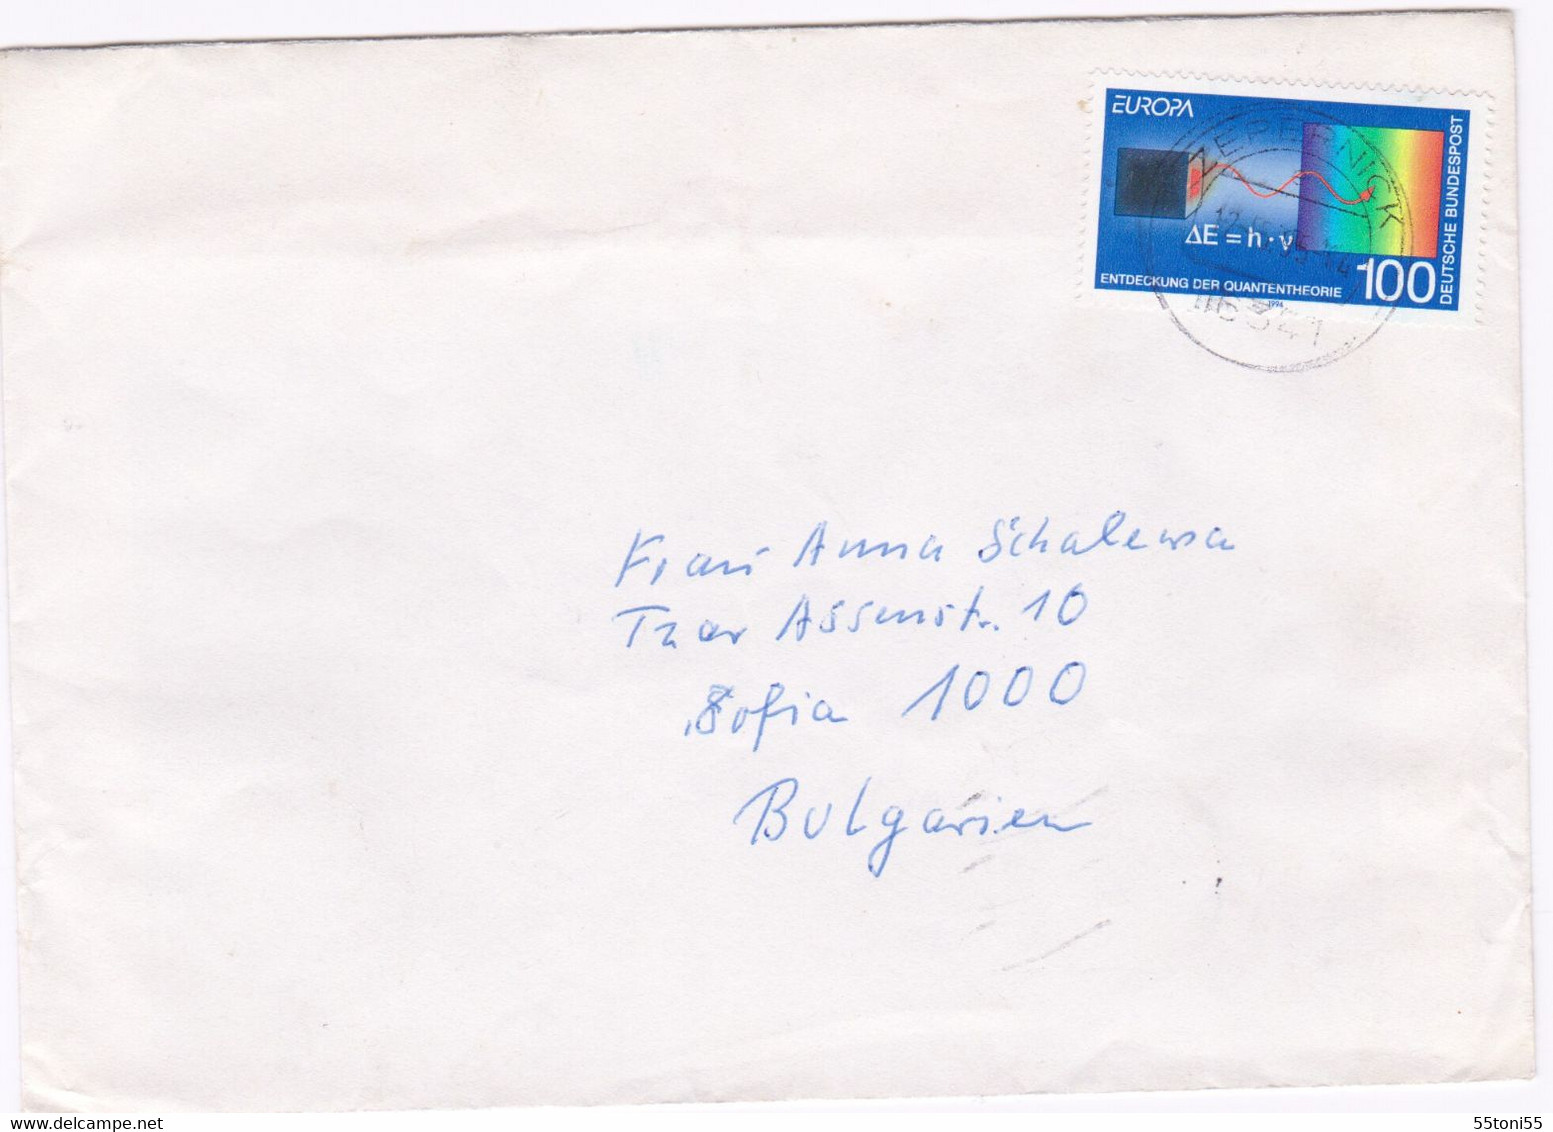 Germany – Bulgarien Brief 1995 - Covers & Documents